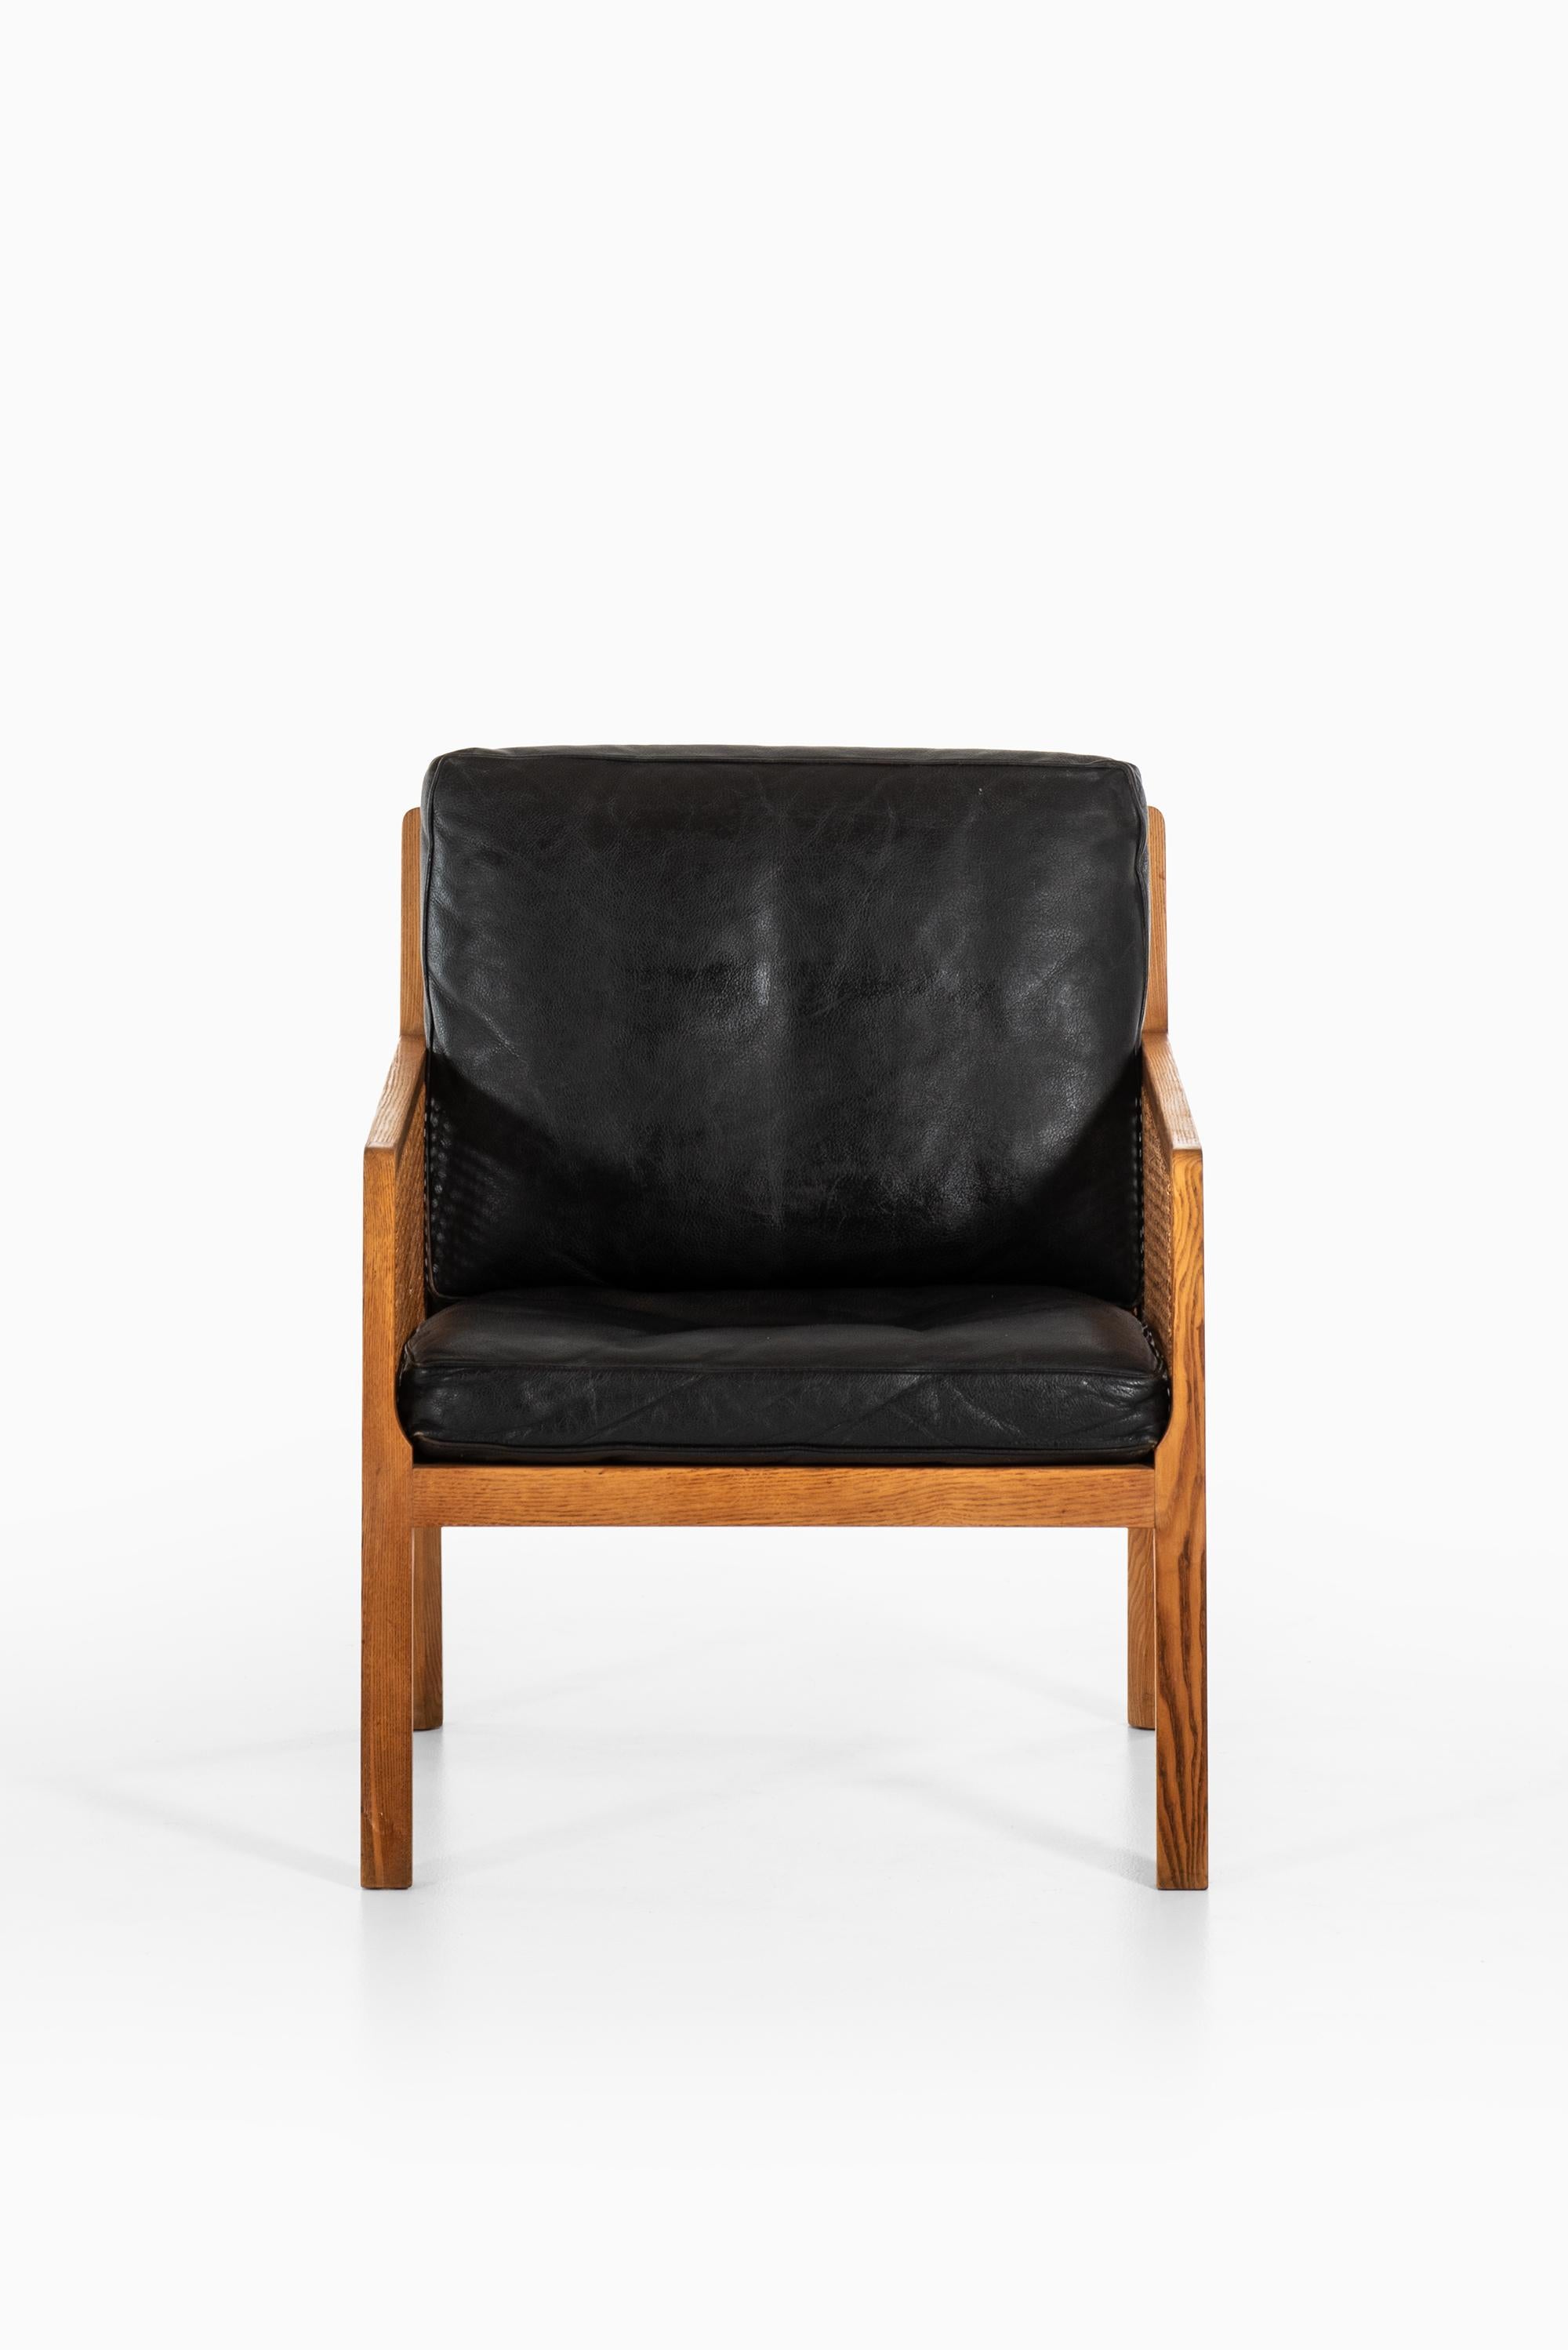 Very rare easy chair designed by Bernt Petersen. Produced by Wørts Møbelsnedkeri in Denmark.